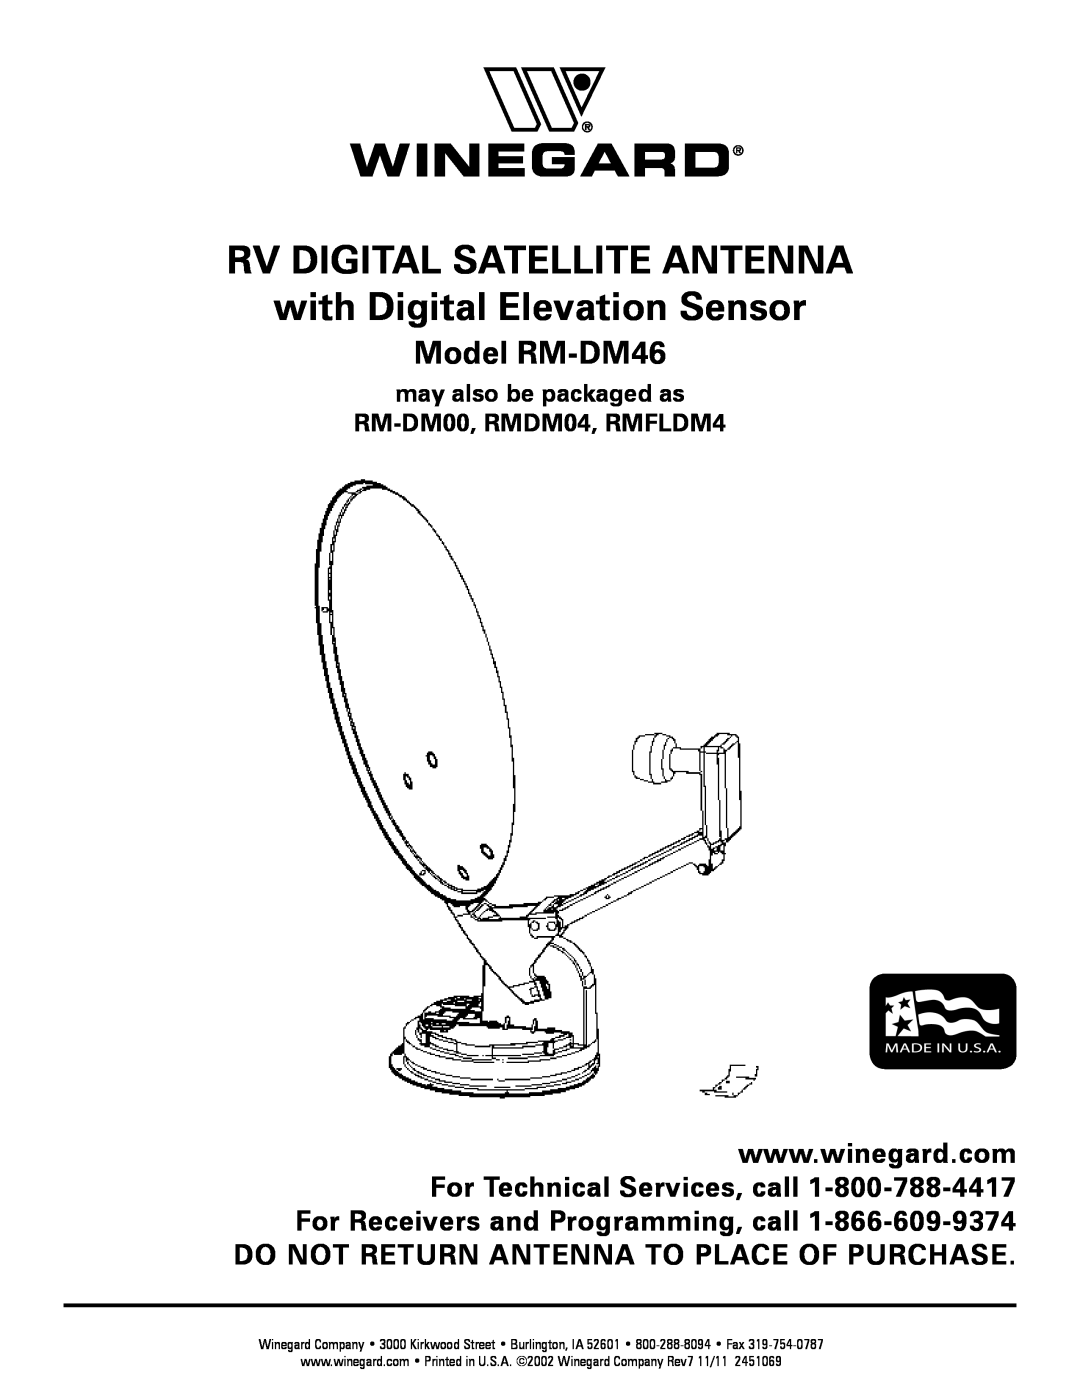 Winegard RM-DM46 manual Do Not Return Antenna To Place Of Purchase, may also be packaged as RM-DM00, RMDM04, RMFLDM4 